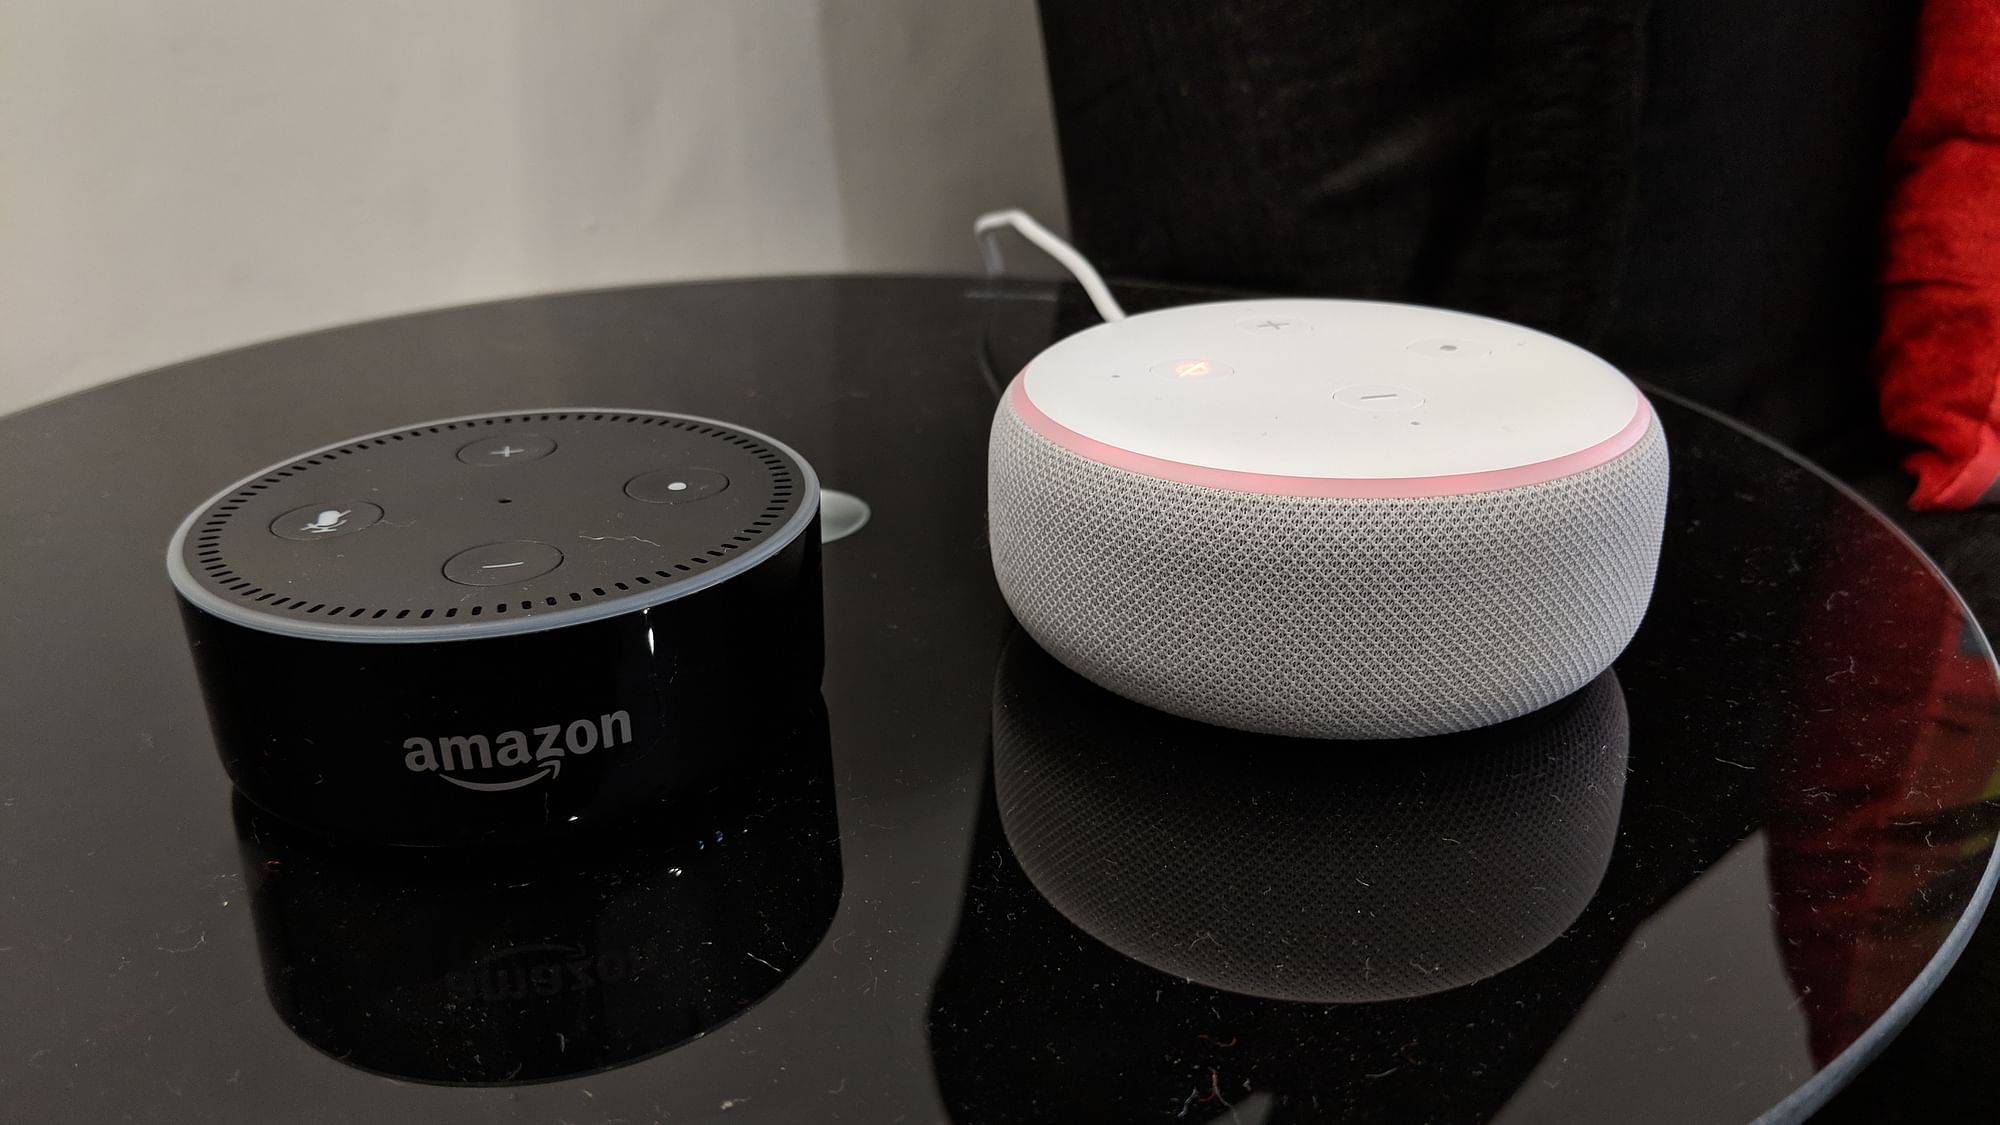 Echo Dot 2017 (left) and the Echo Dot 2018 (right)